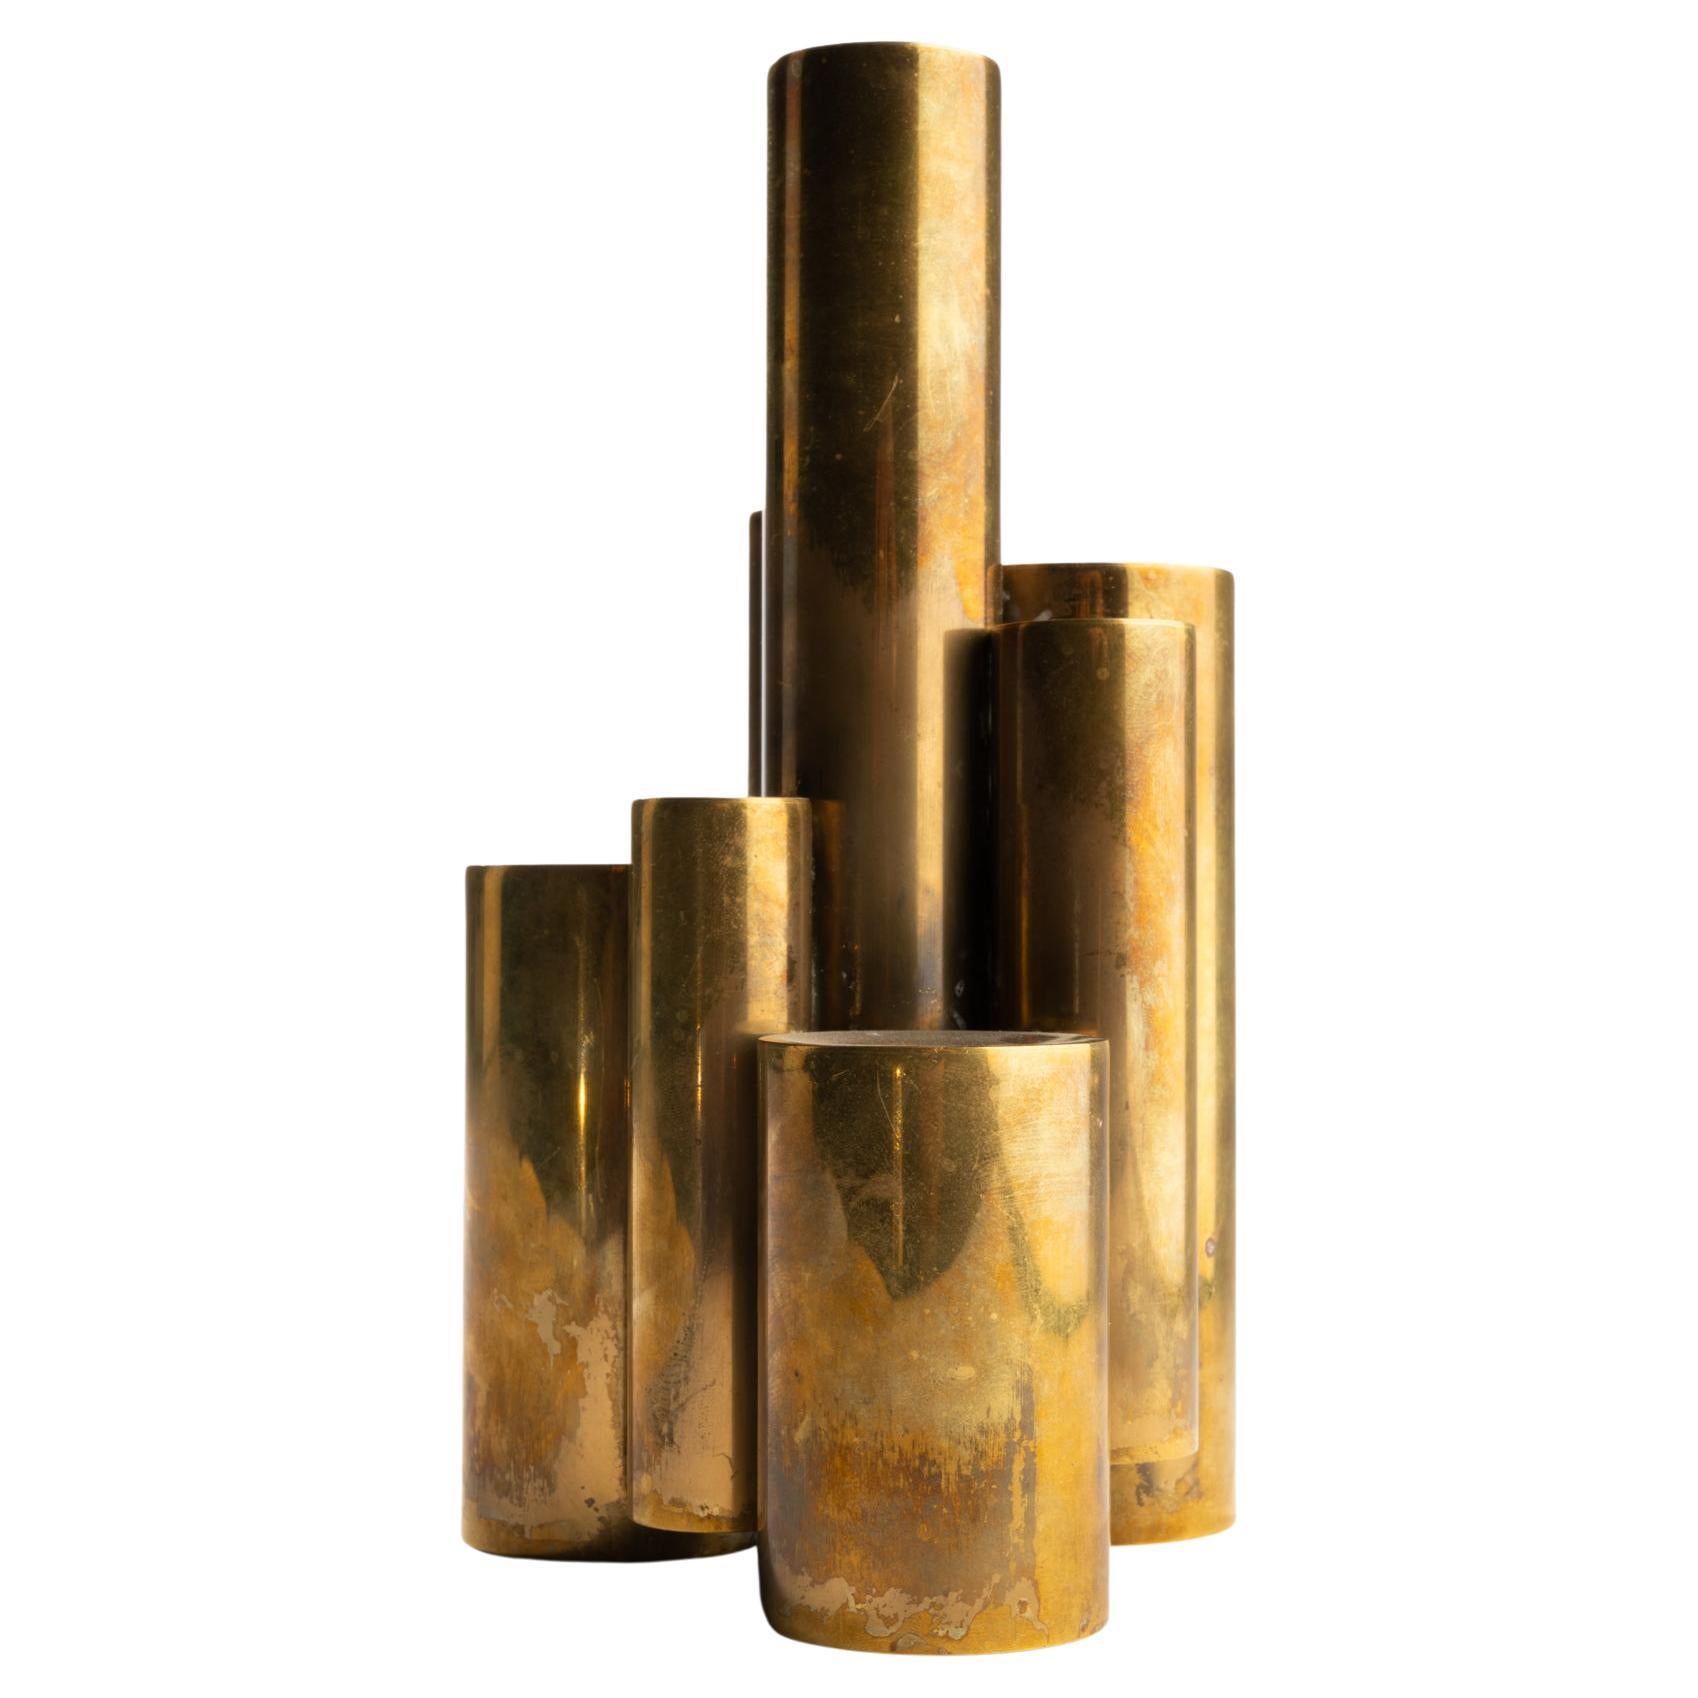 Gio Ponti is an Italian architect, designer, painter, author, teacher and director of publications.
Vintage polished brass tubular candlestick in the style of Gio Ponti. Elegant candleholder with cascade design for 8 candles with a 3/4